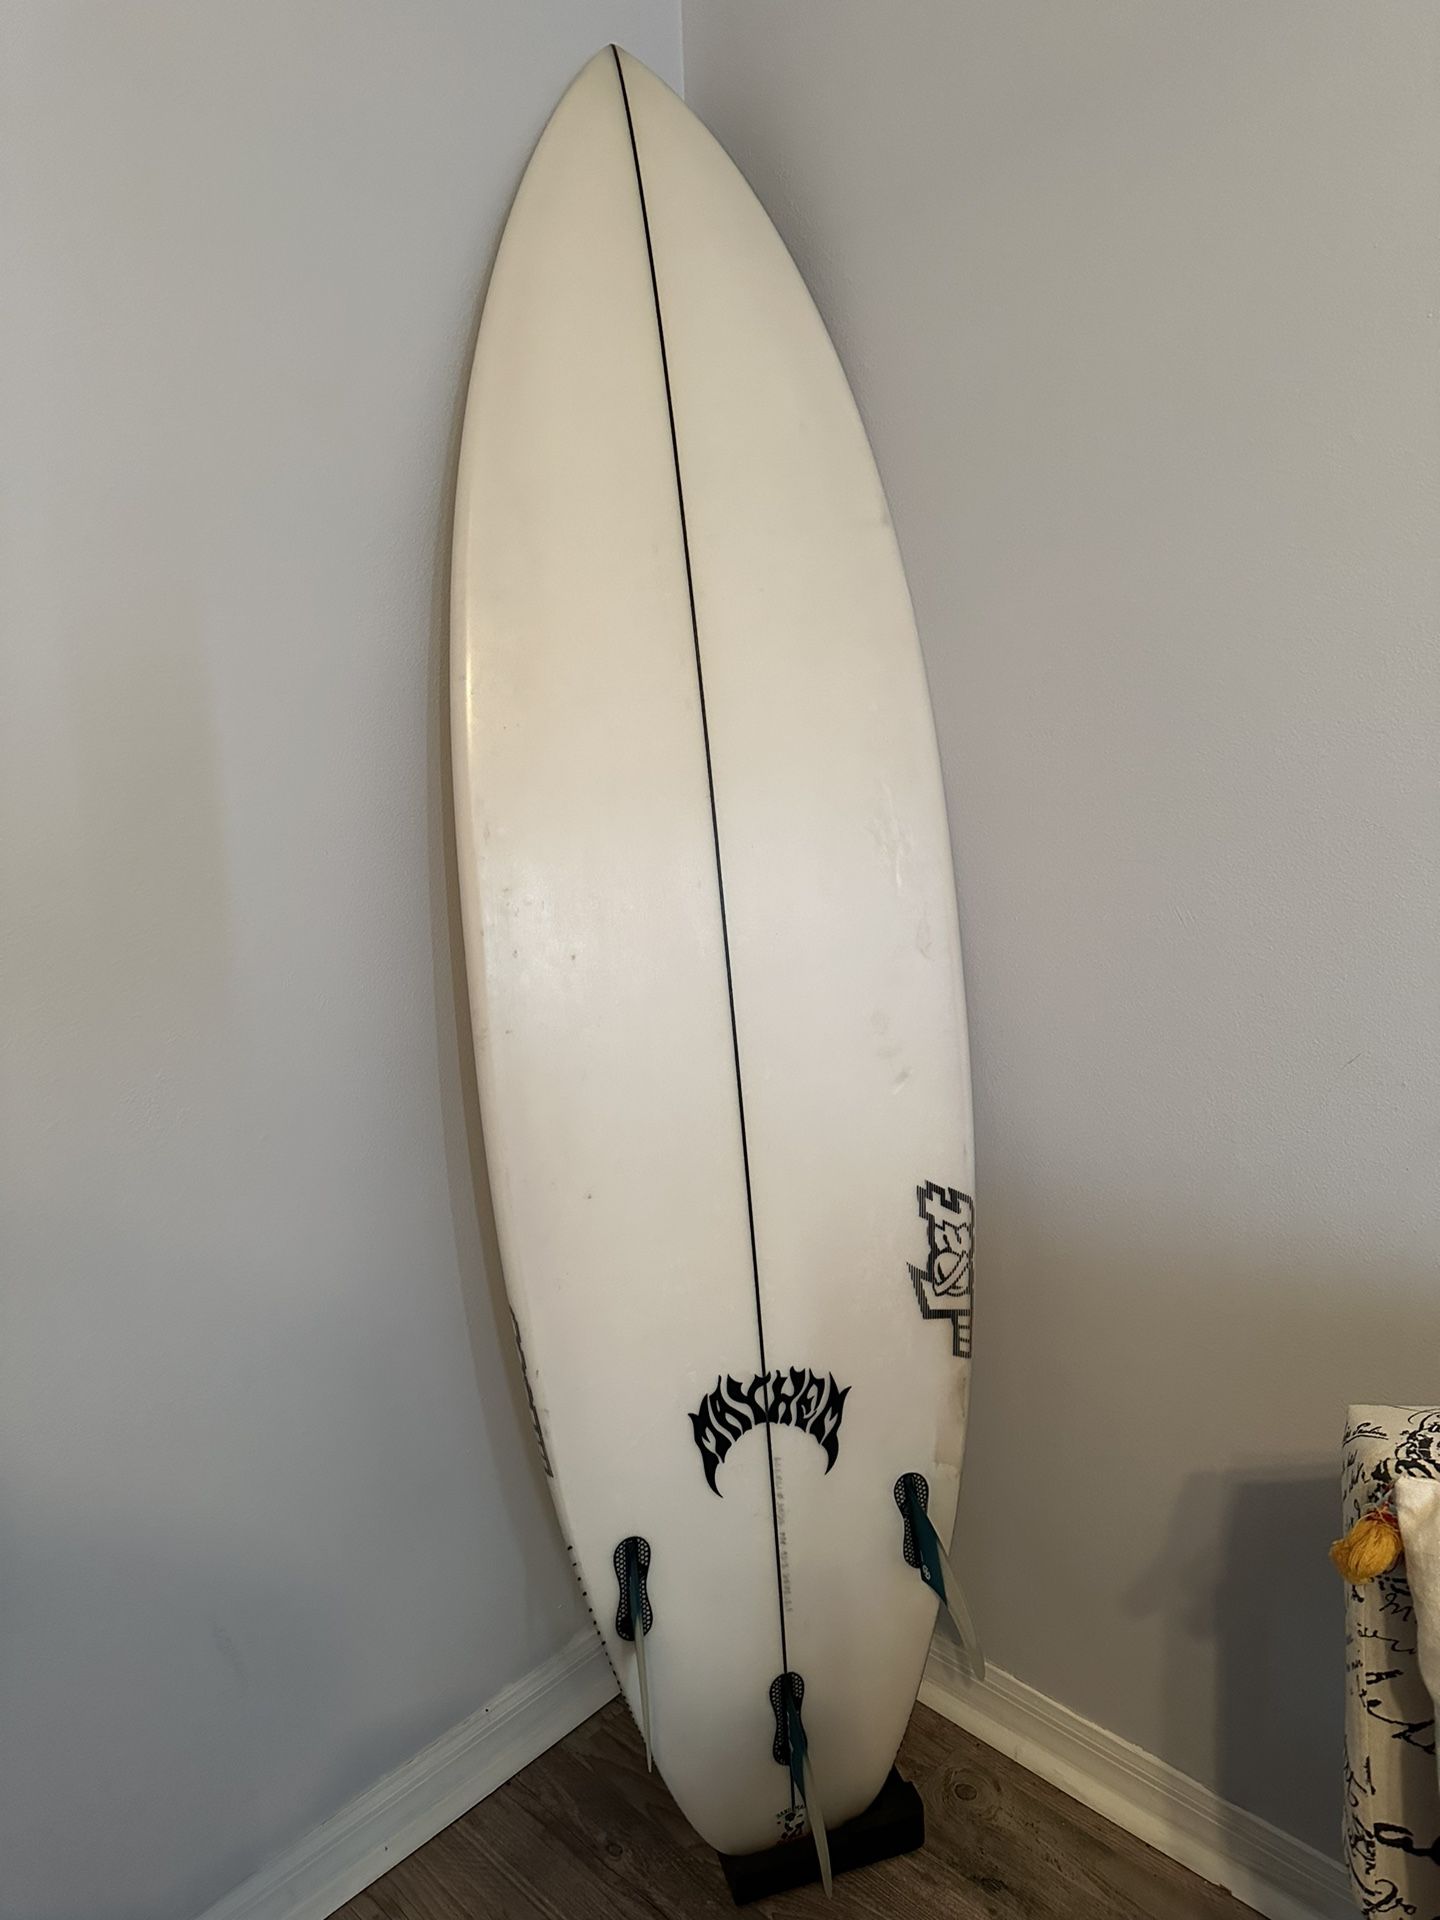 LOST Surfboard 6’2 Uber-Driver $500